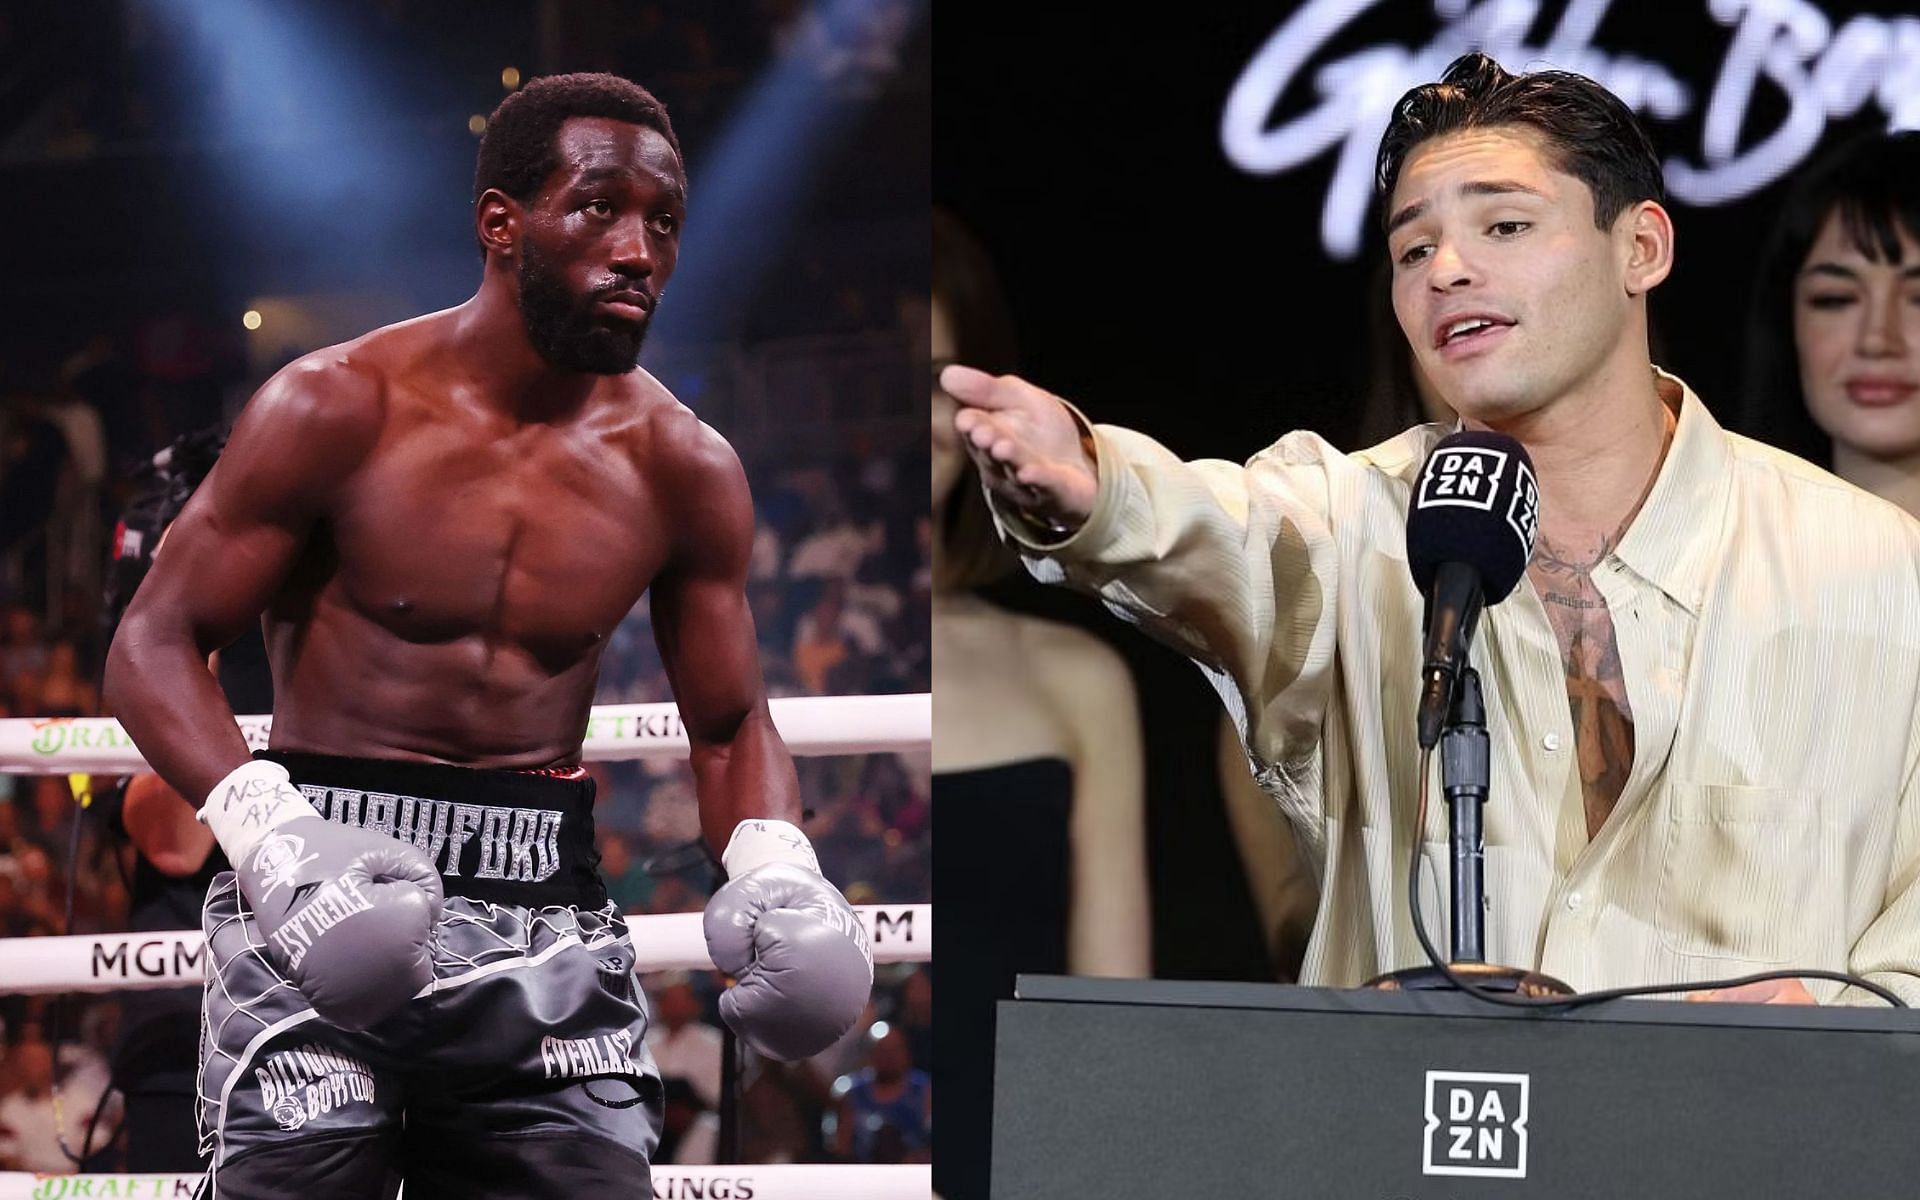 Ryan Garcia (right) calls out Terence Crawford (left) in unexpected fashion [Images Courtesy: @GettyImages]